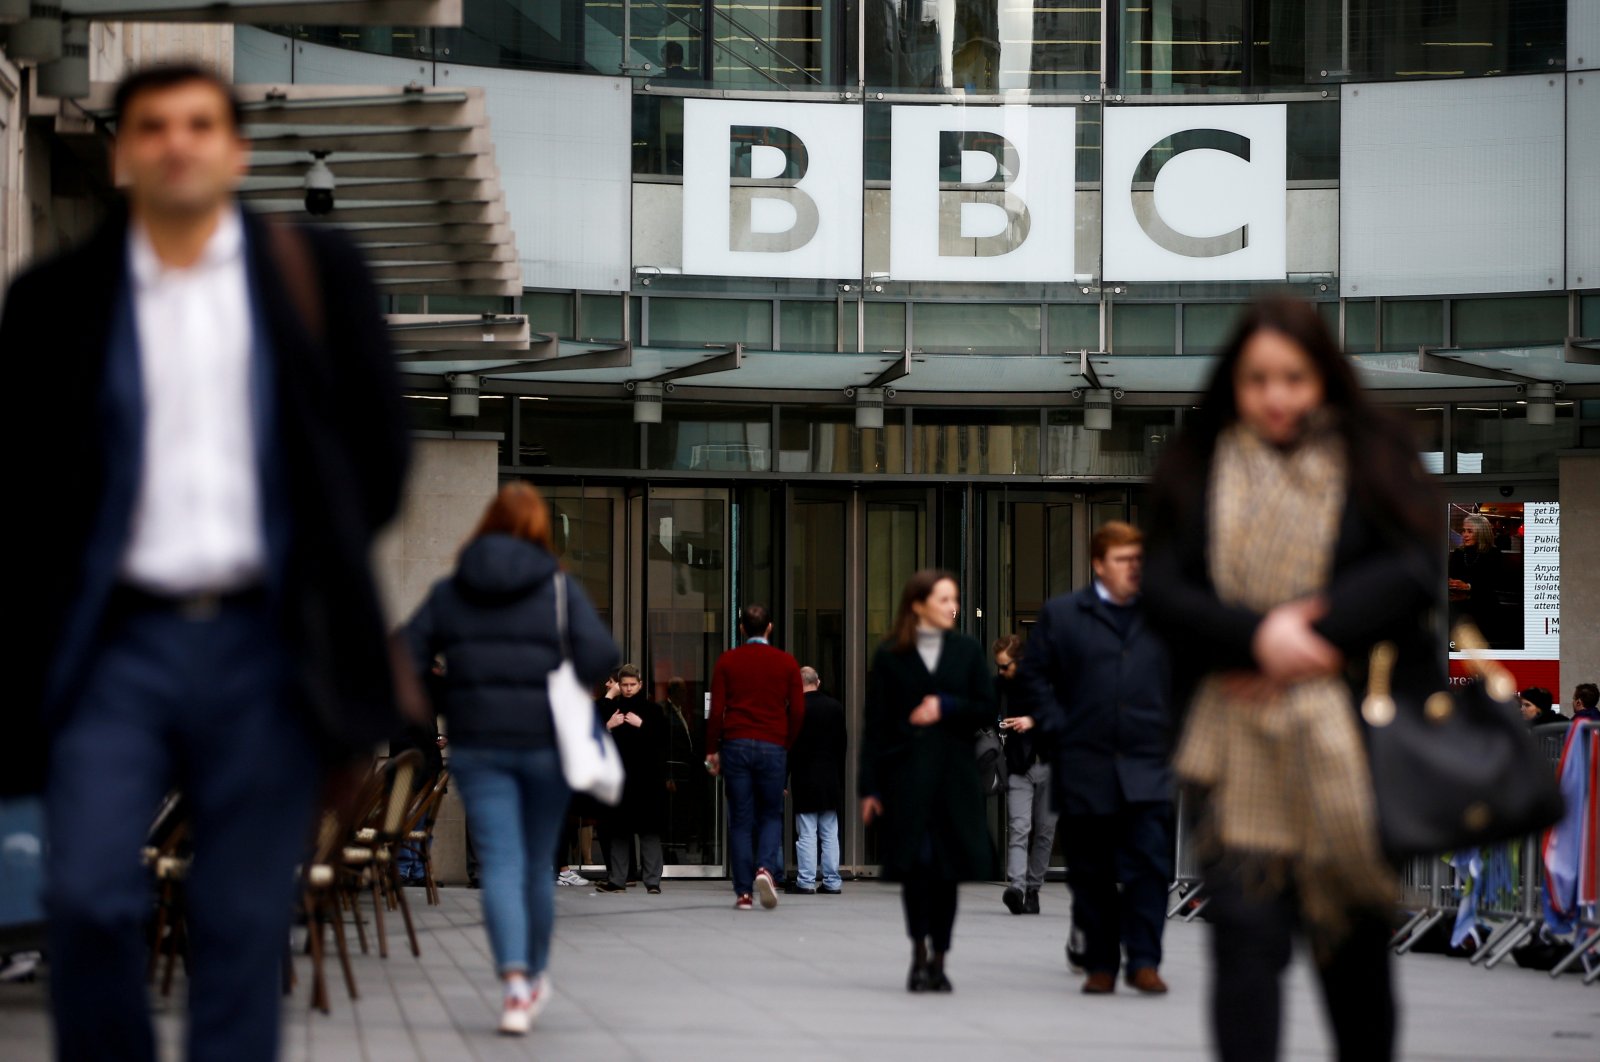 Pedestrians walk past a BBC logo at Broadcasting House in London, Britain, Jan. 29, 2020. (REUTERS Photo)